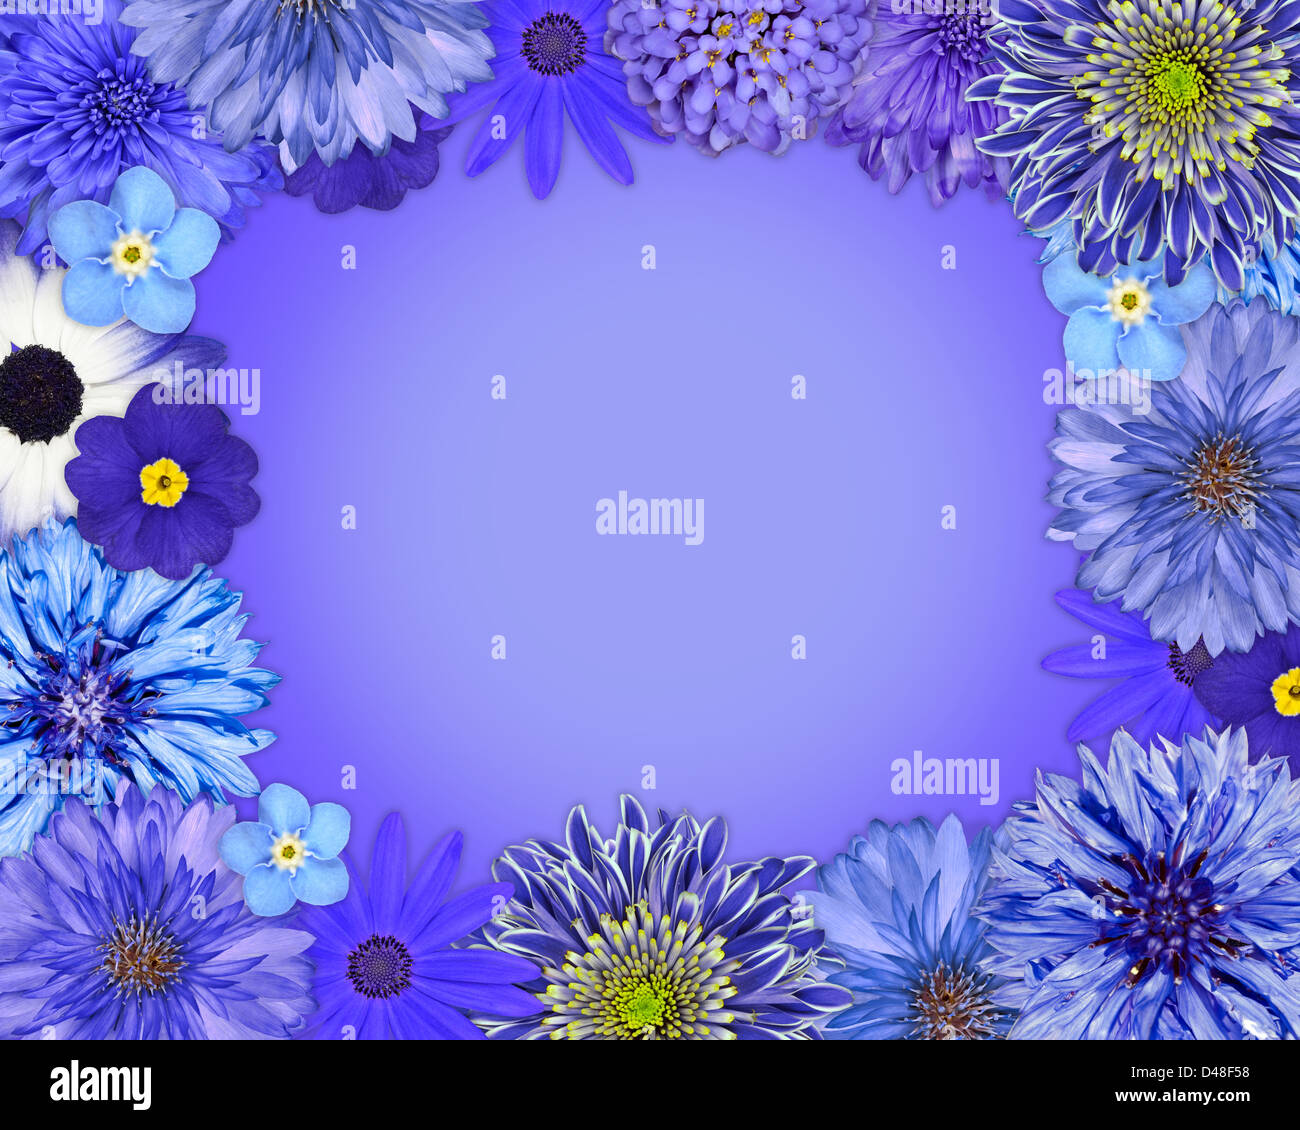 Flower Frame with Blue, Purple Flowers Isolated on Blue Background ...